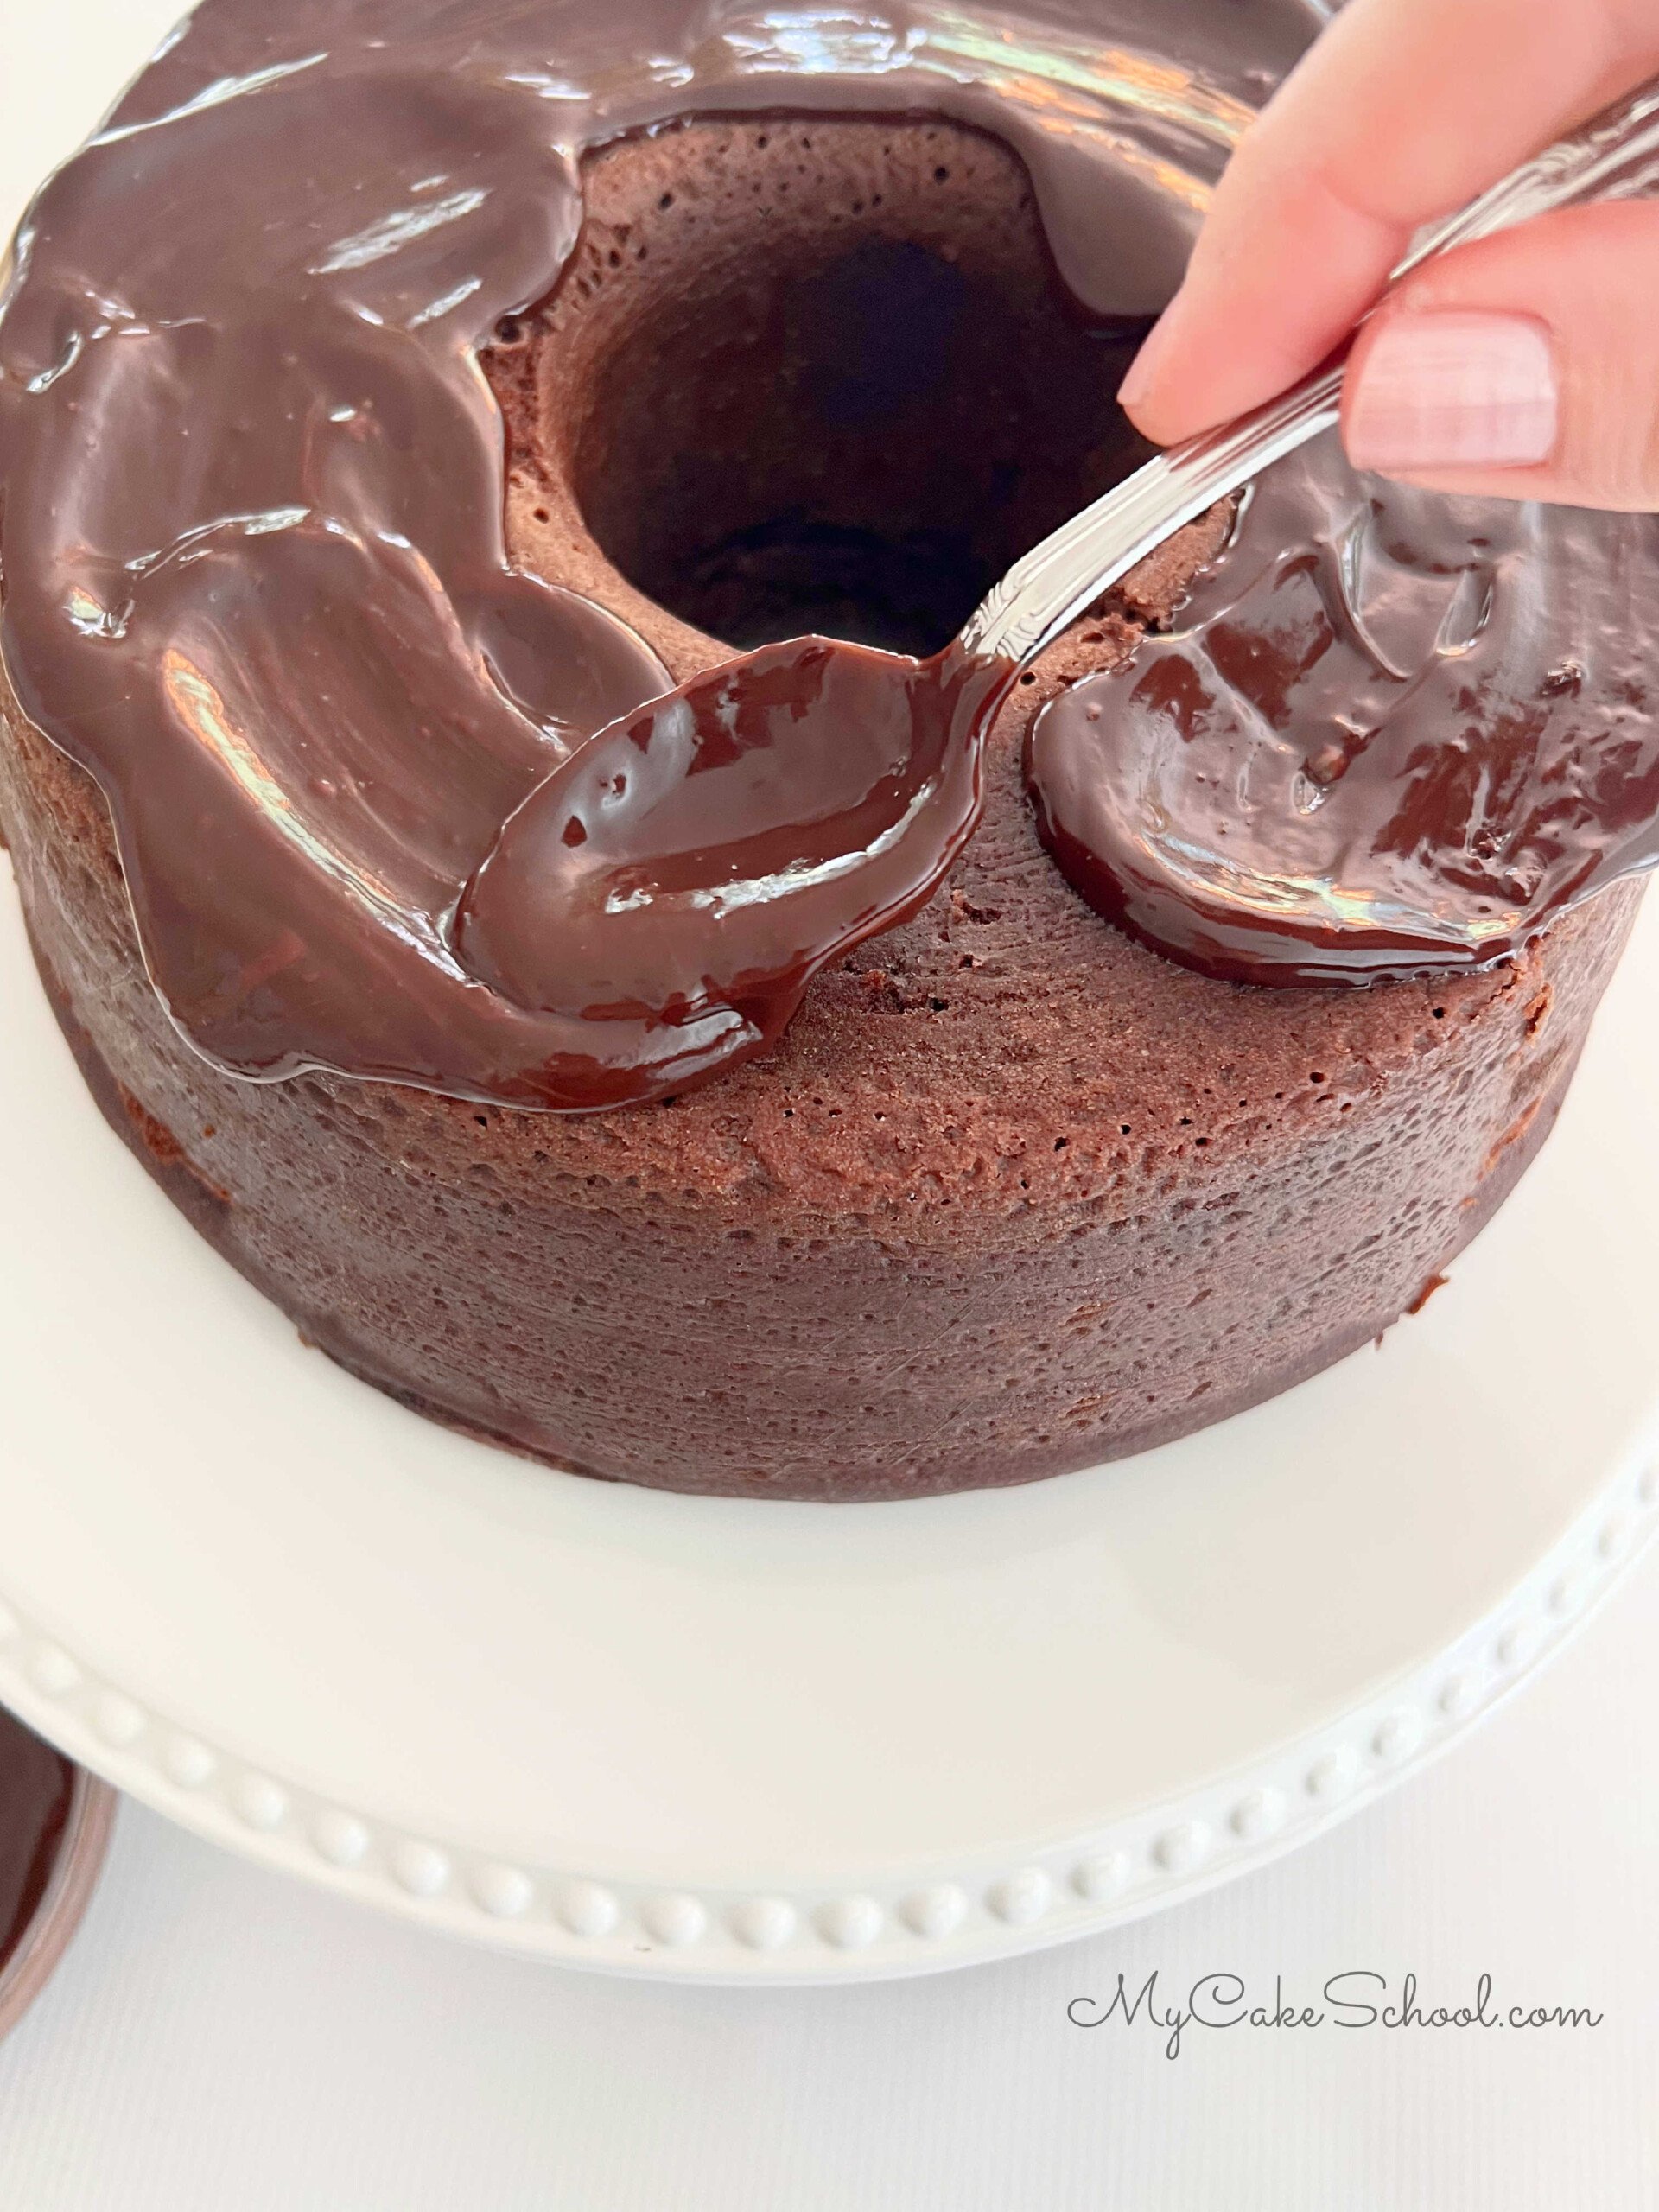 Apply the chocolate glaze to the top of the chocolate bundt cake with a spoon.